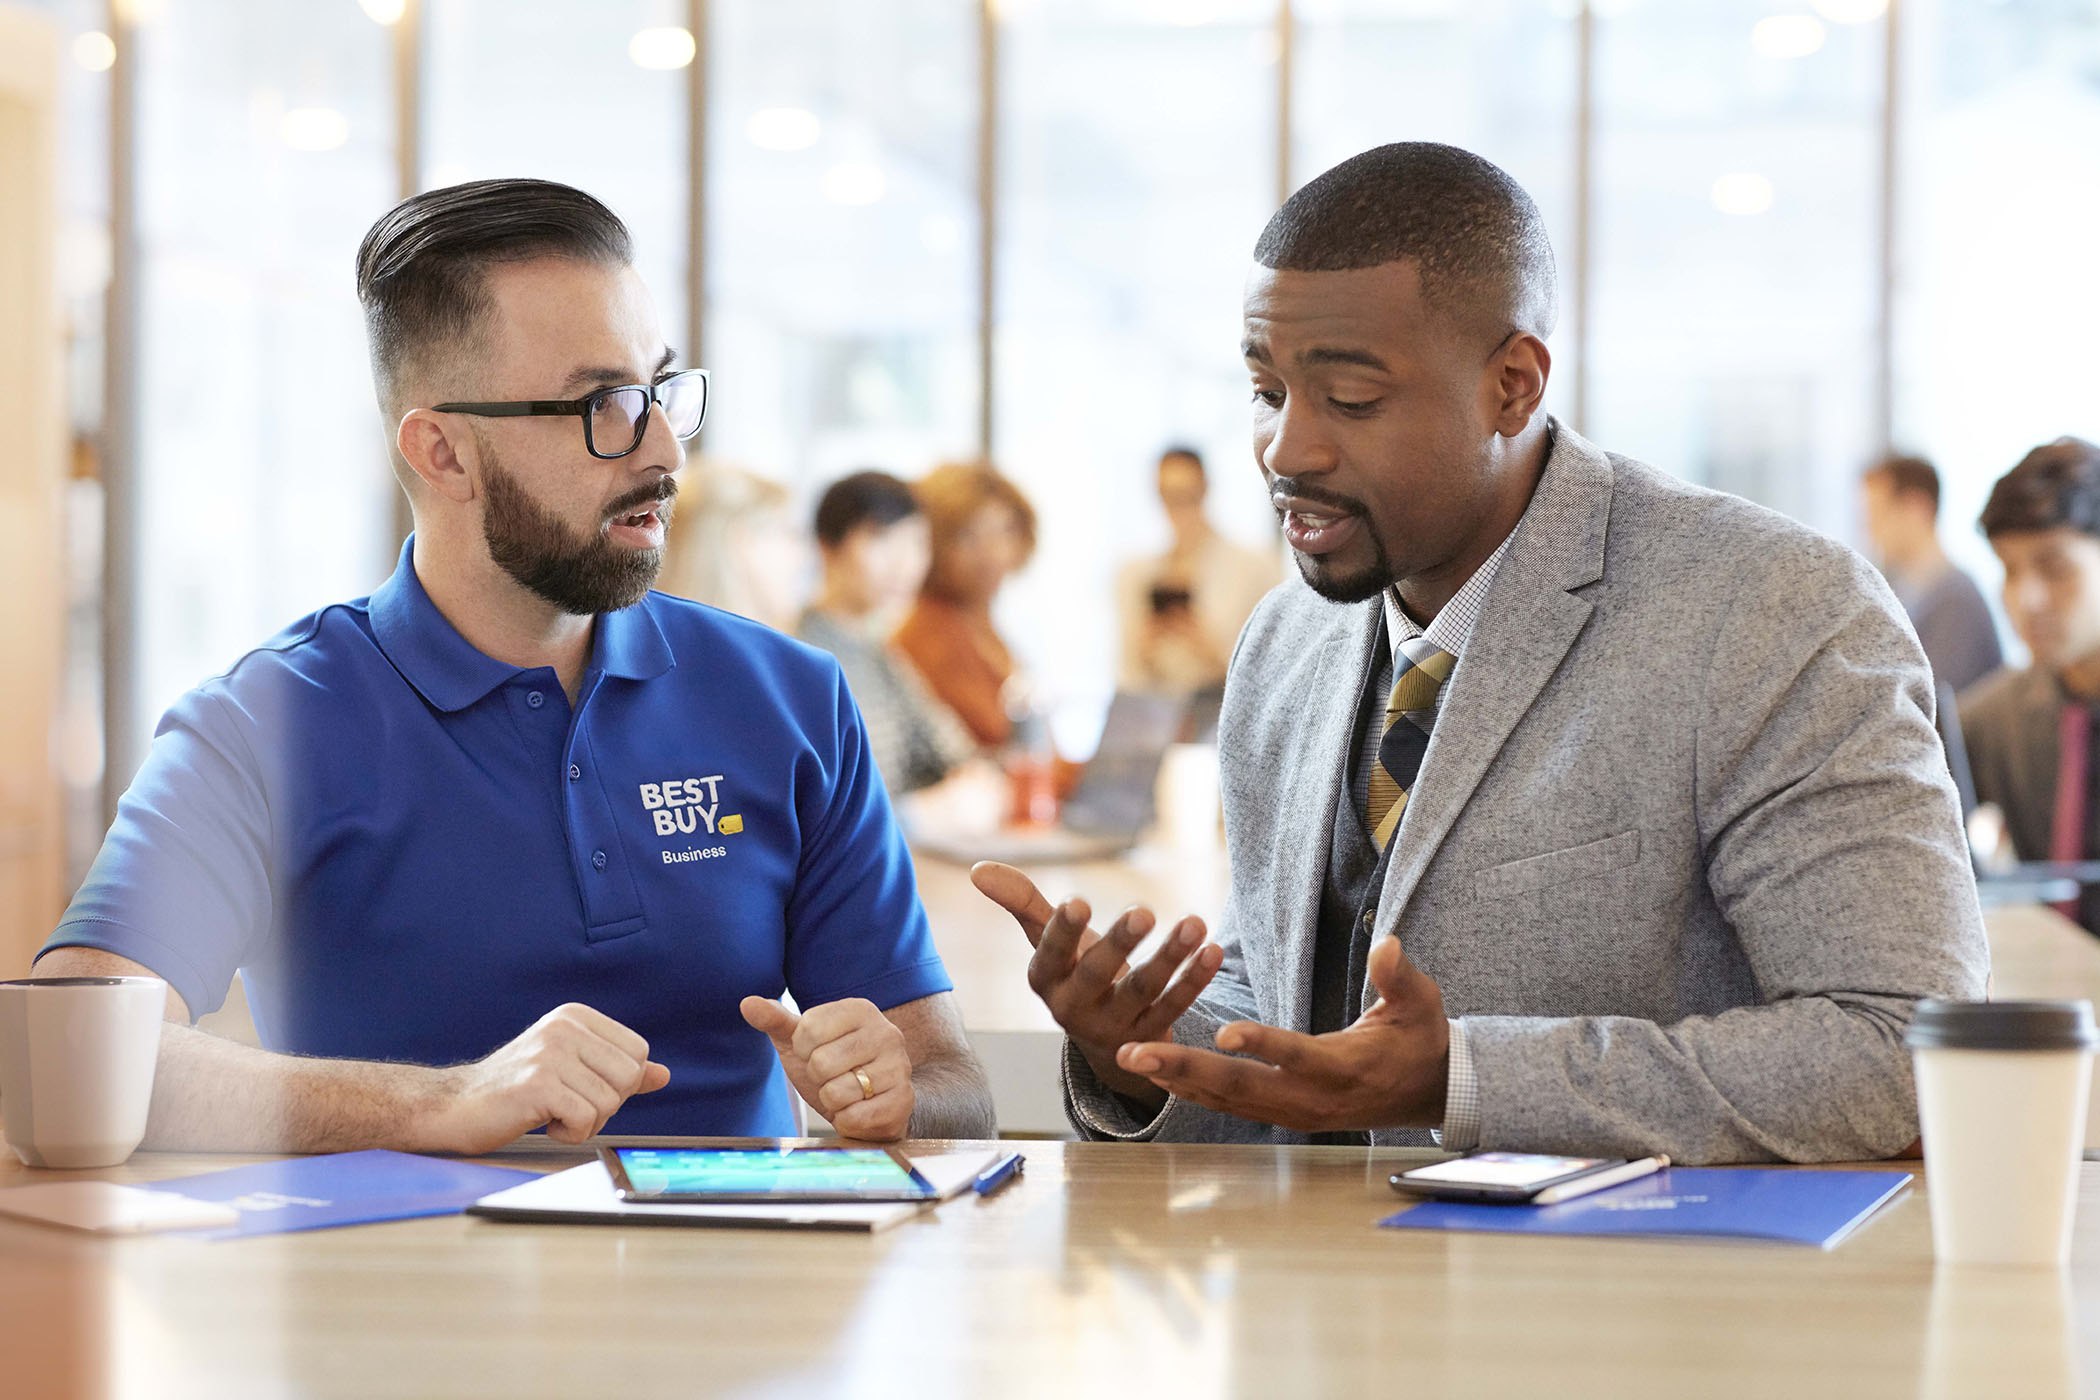 How can Best Buy Business help your organization?